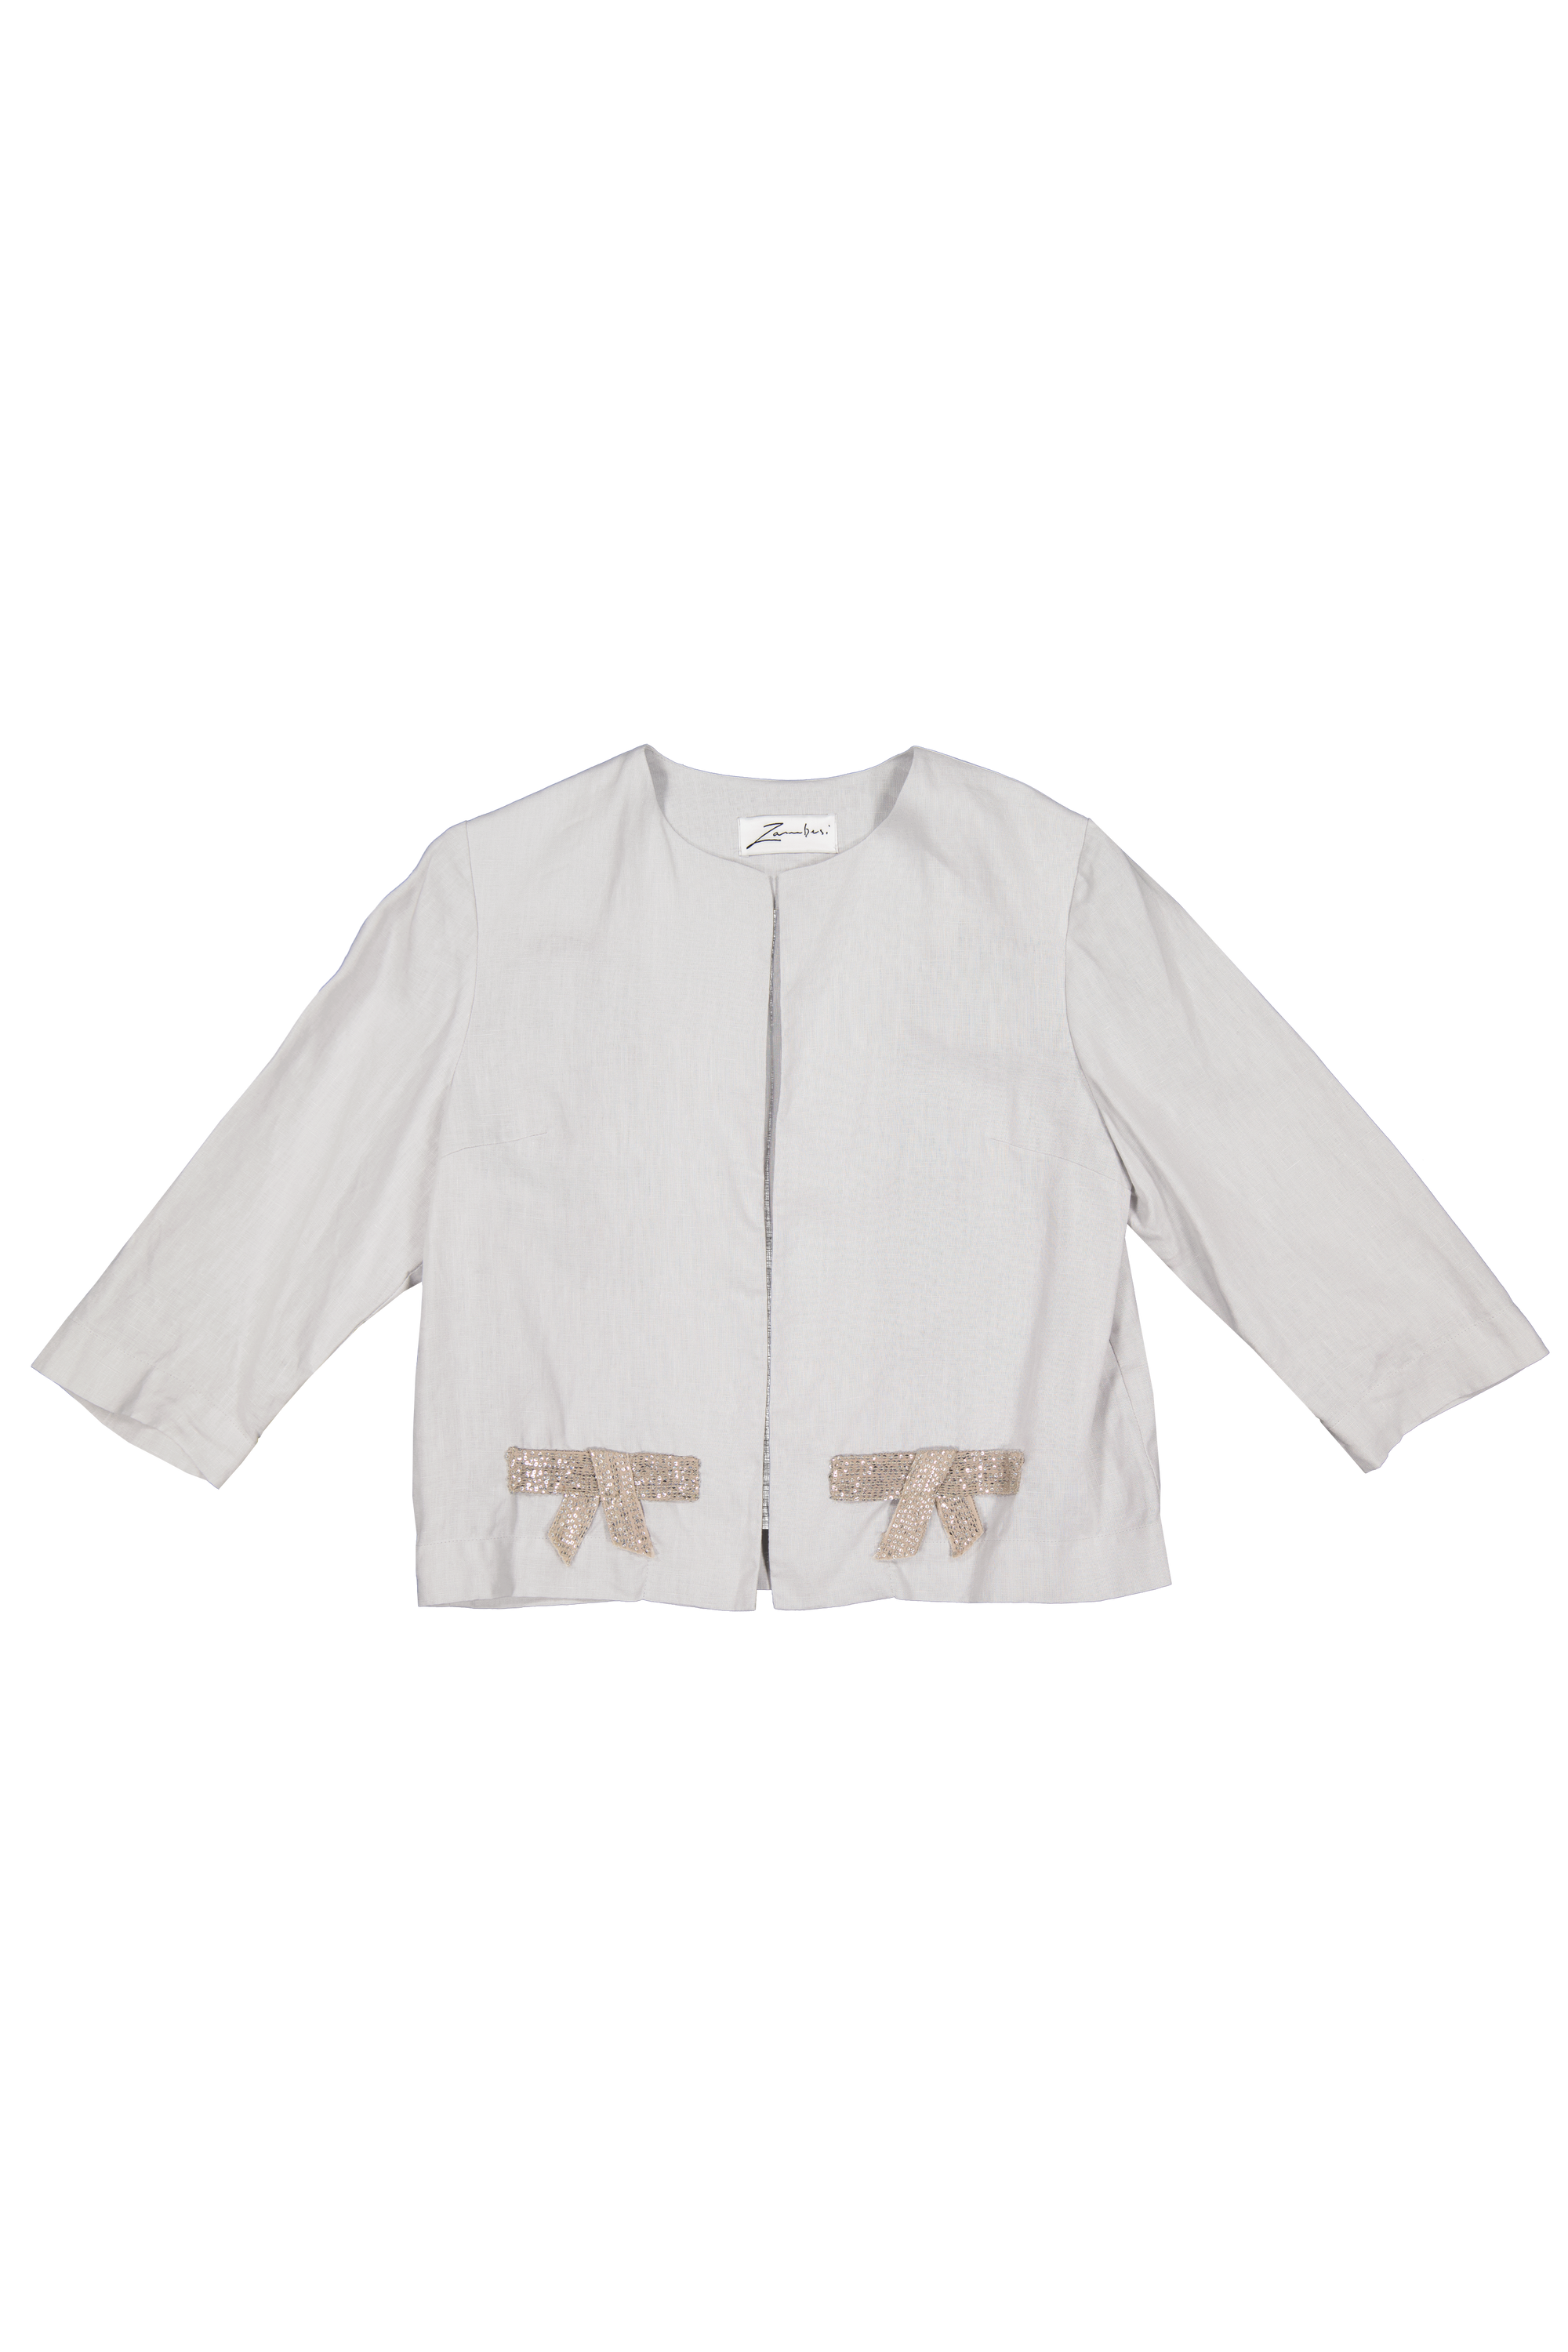 BOW JACKET IN DOVE, S23